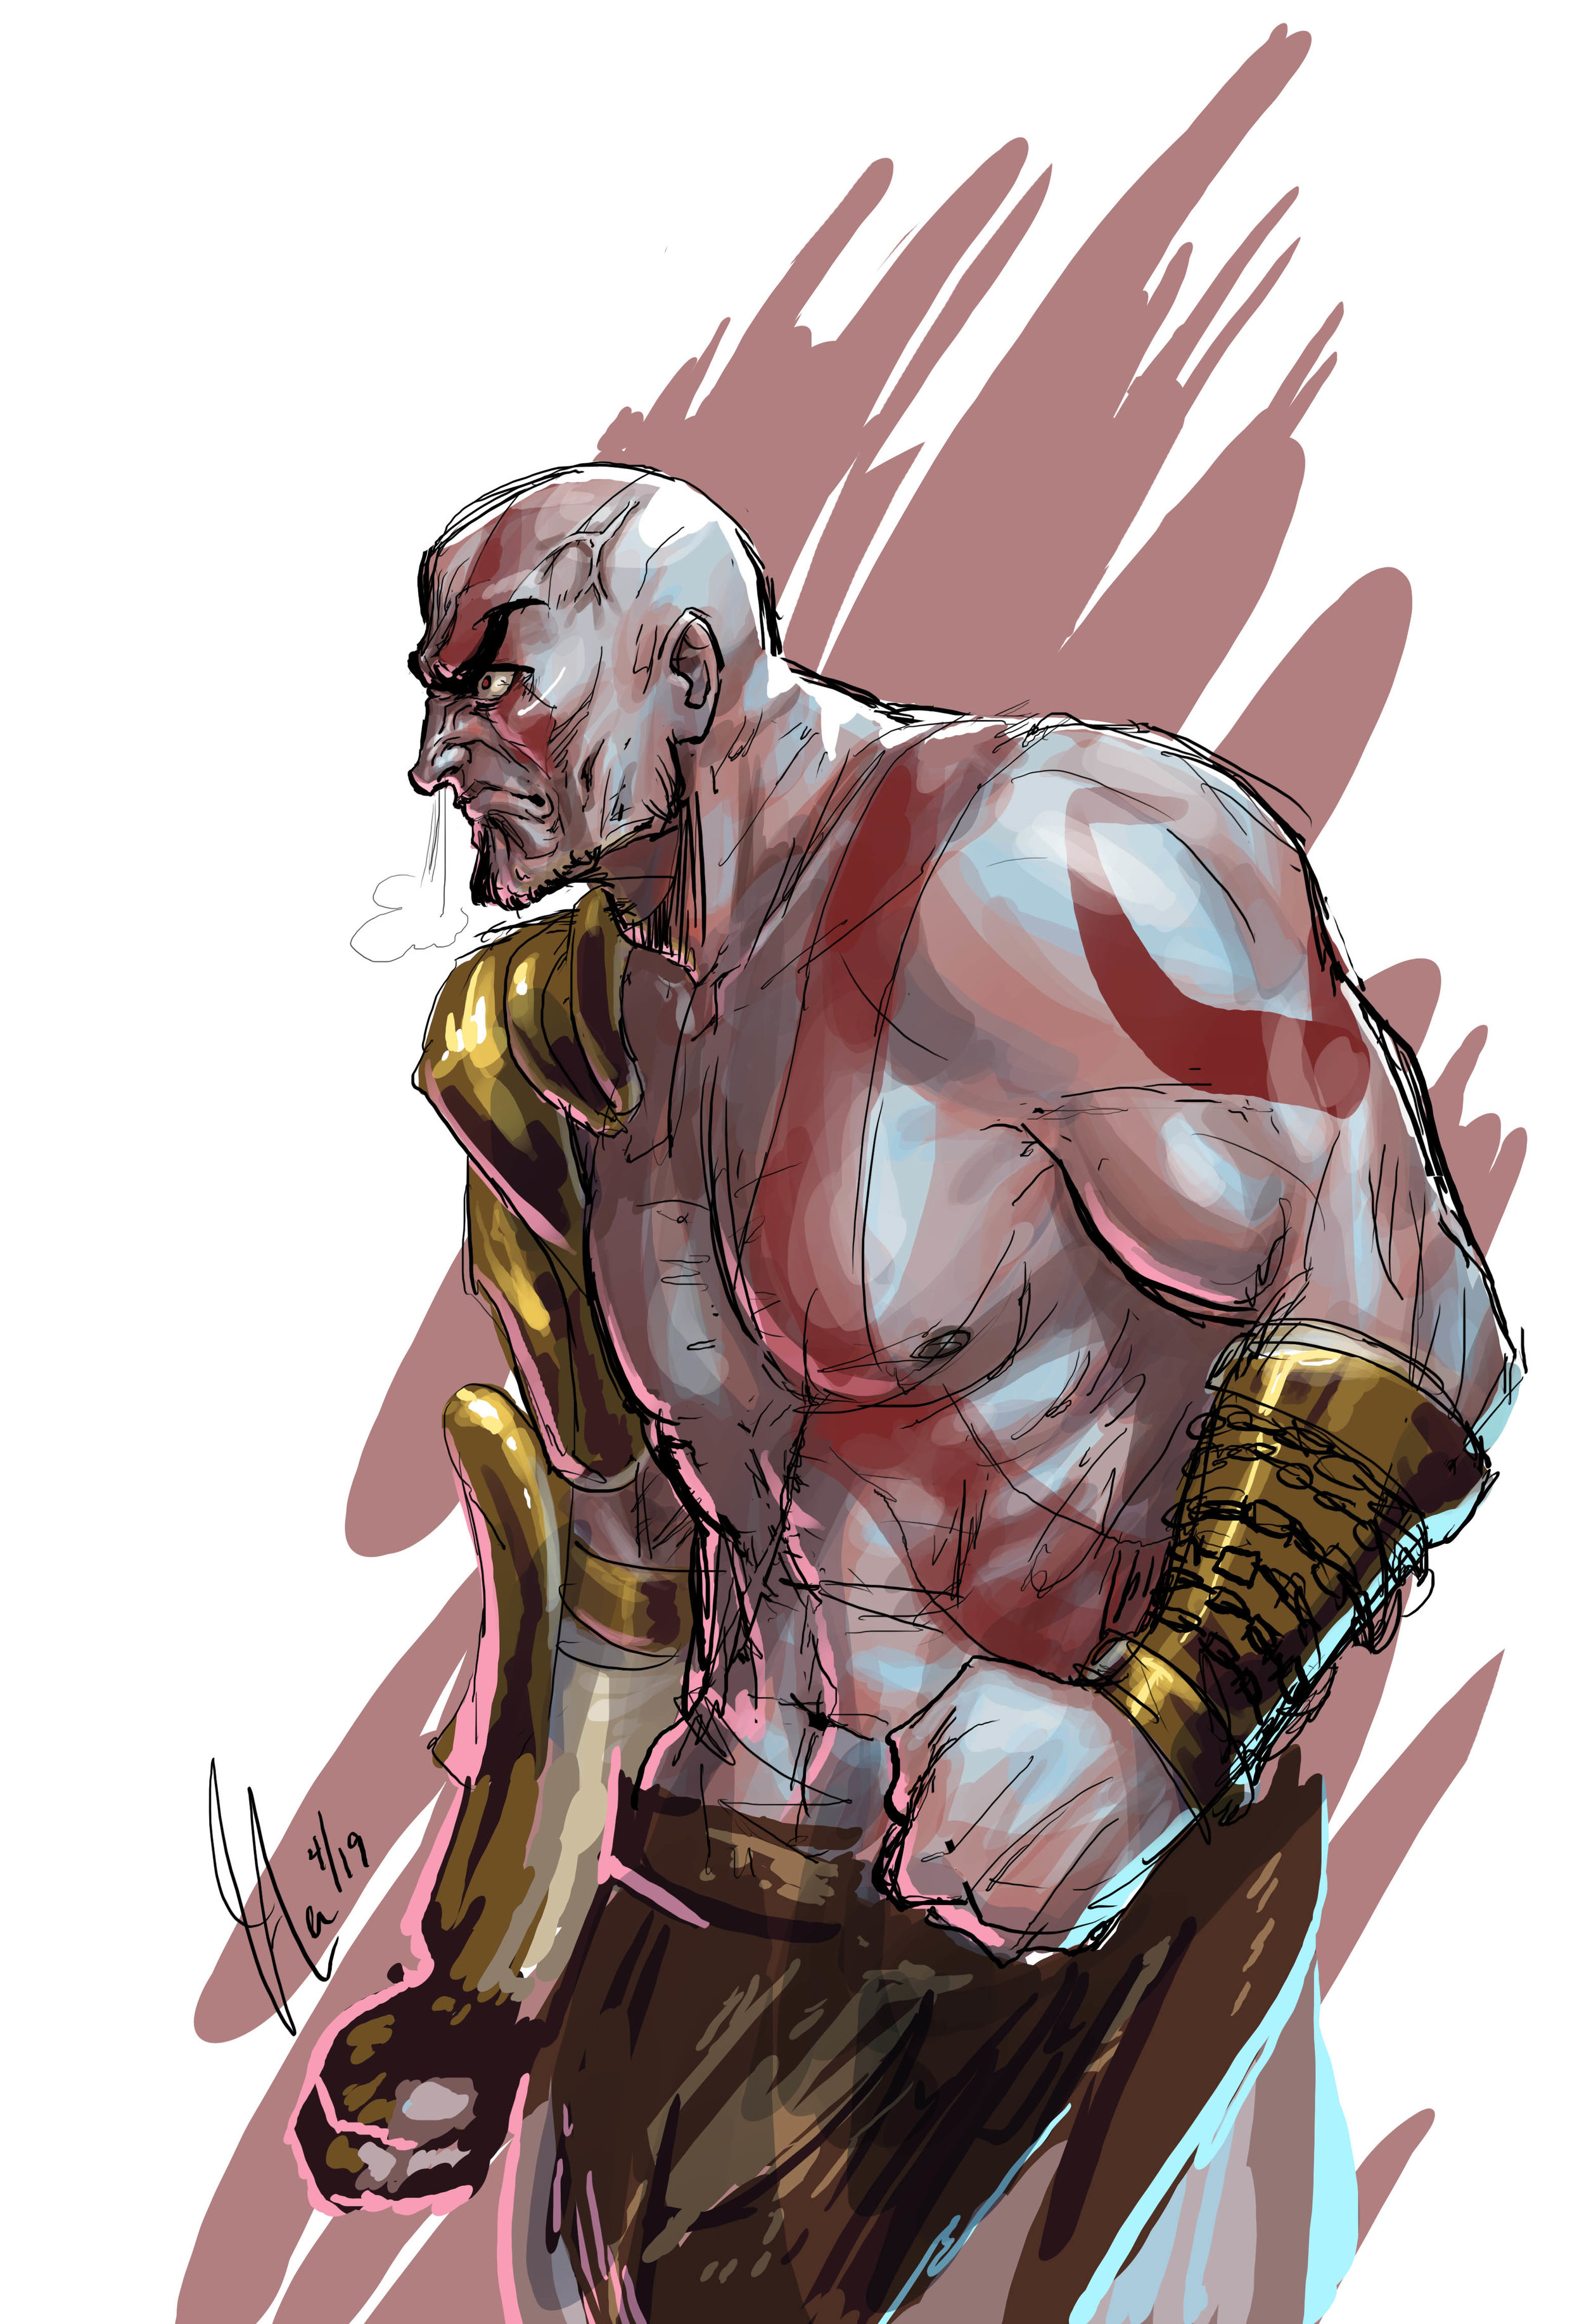 kratos being angry 1.jpg